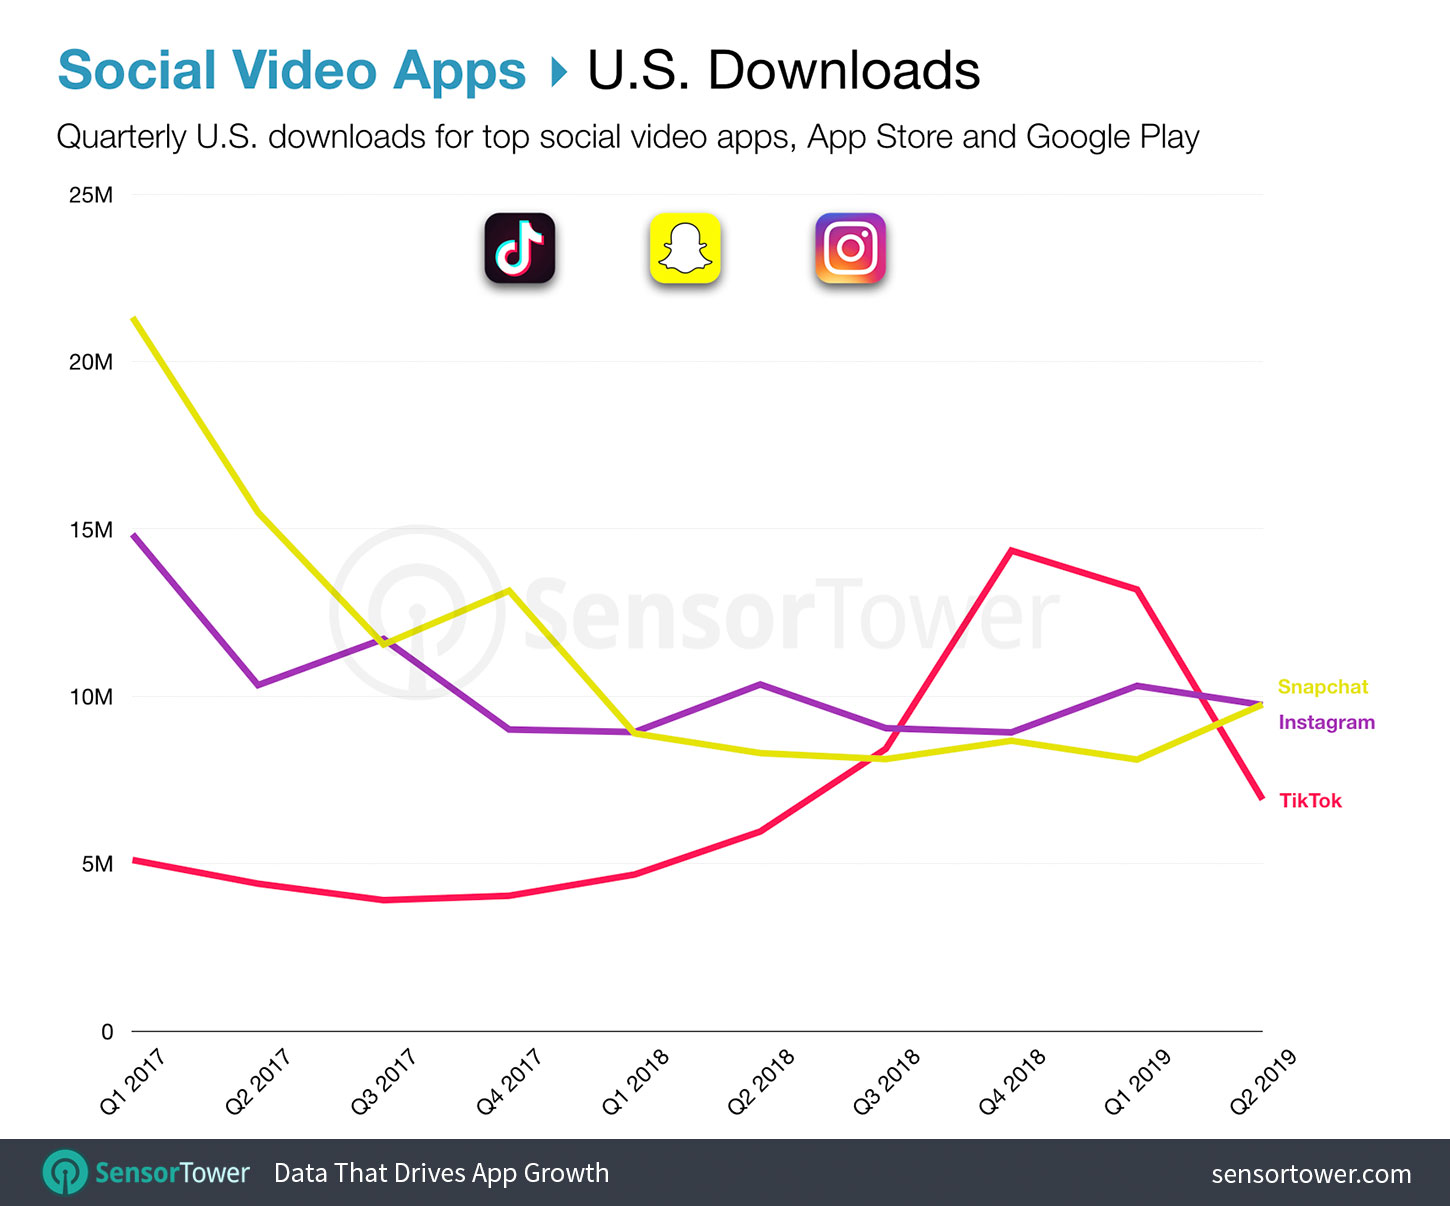 The State of Social Video Apps in the U.S. for Q2 2019